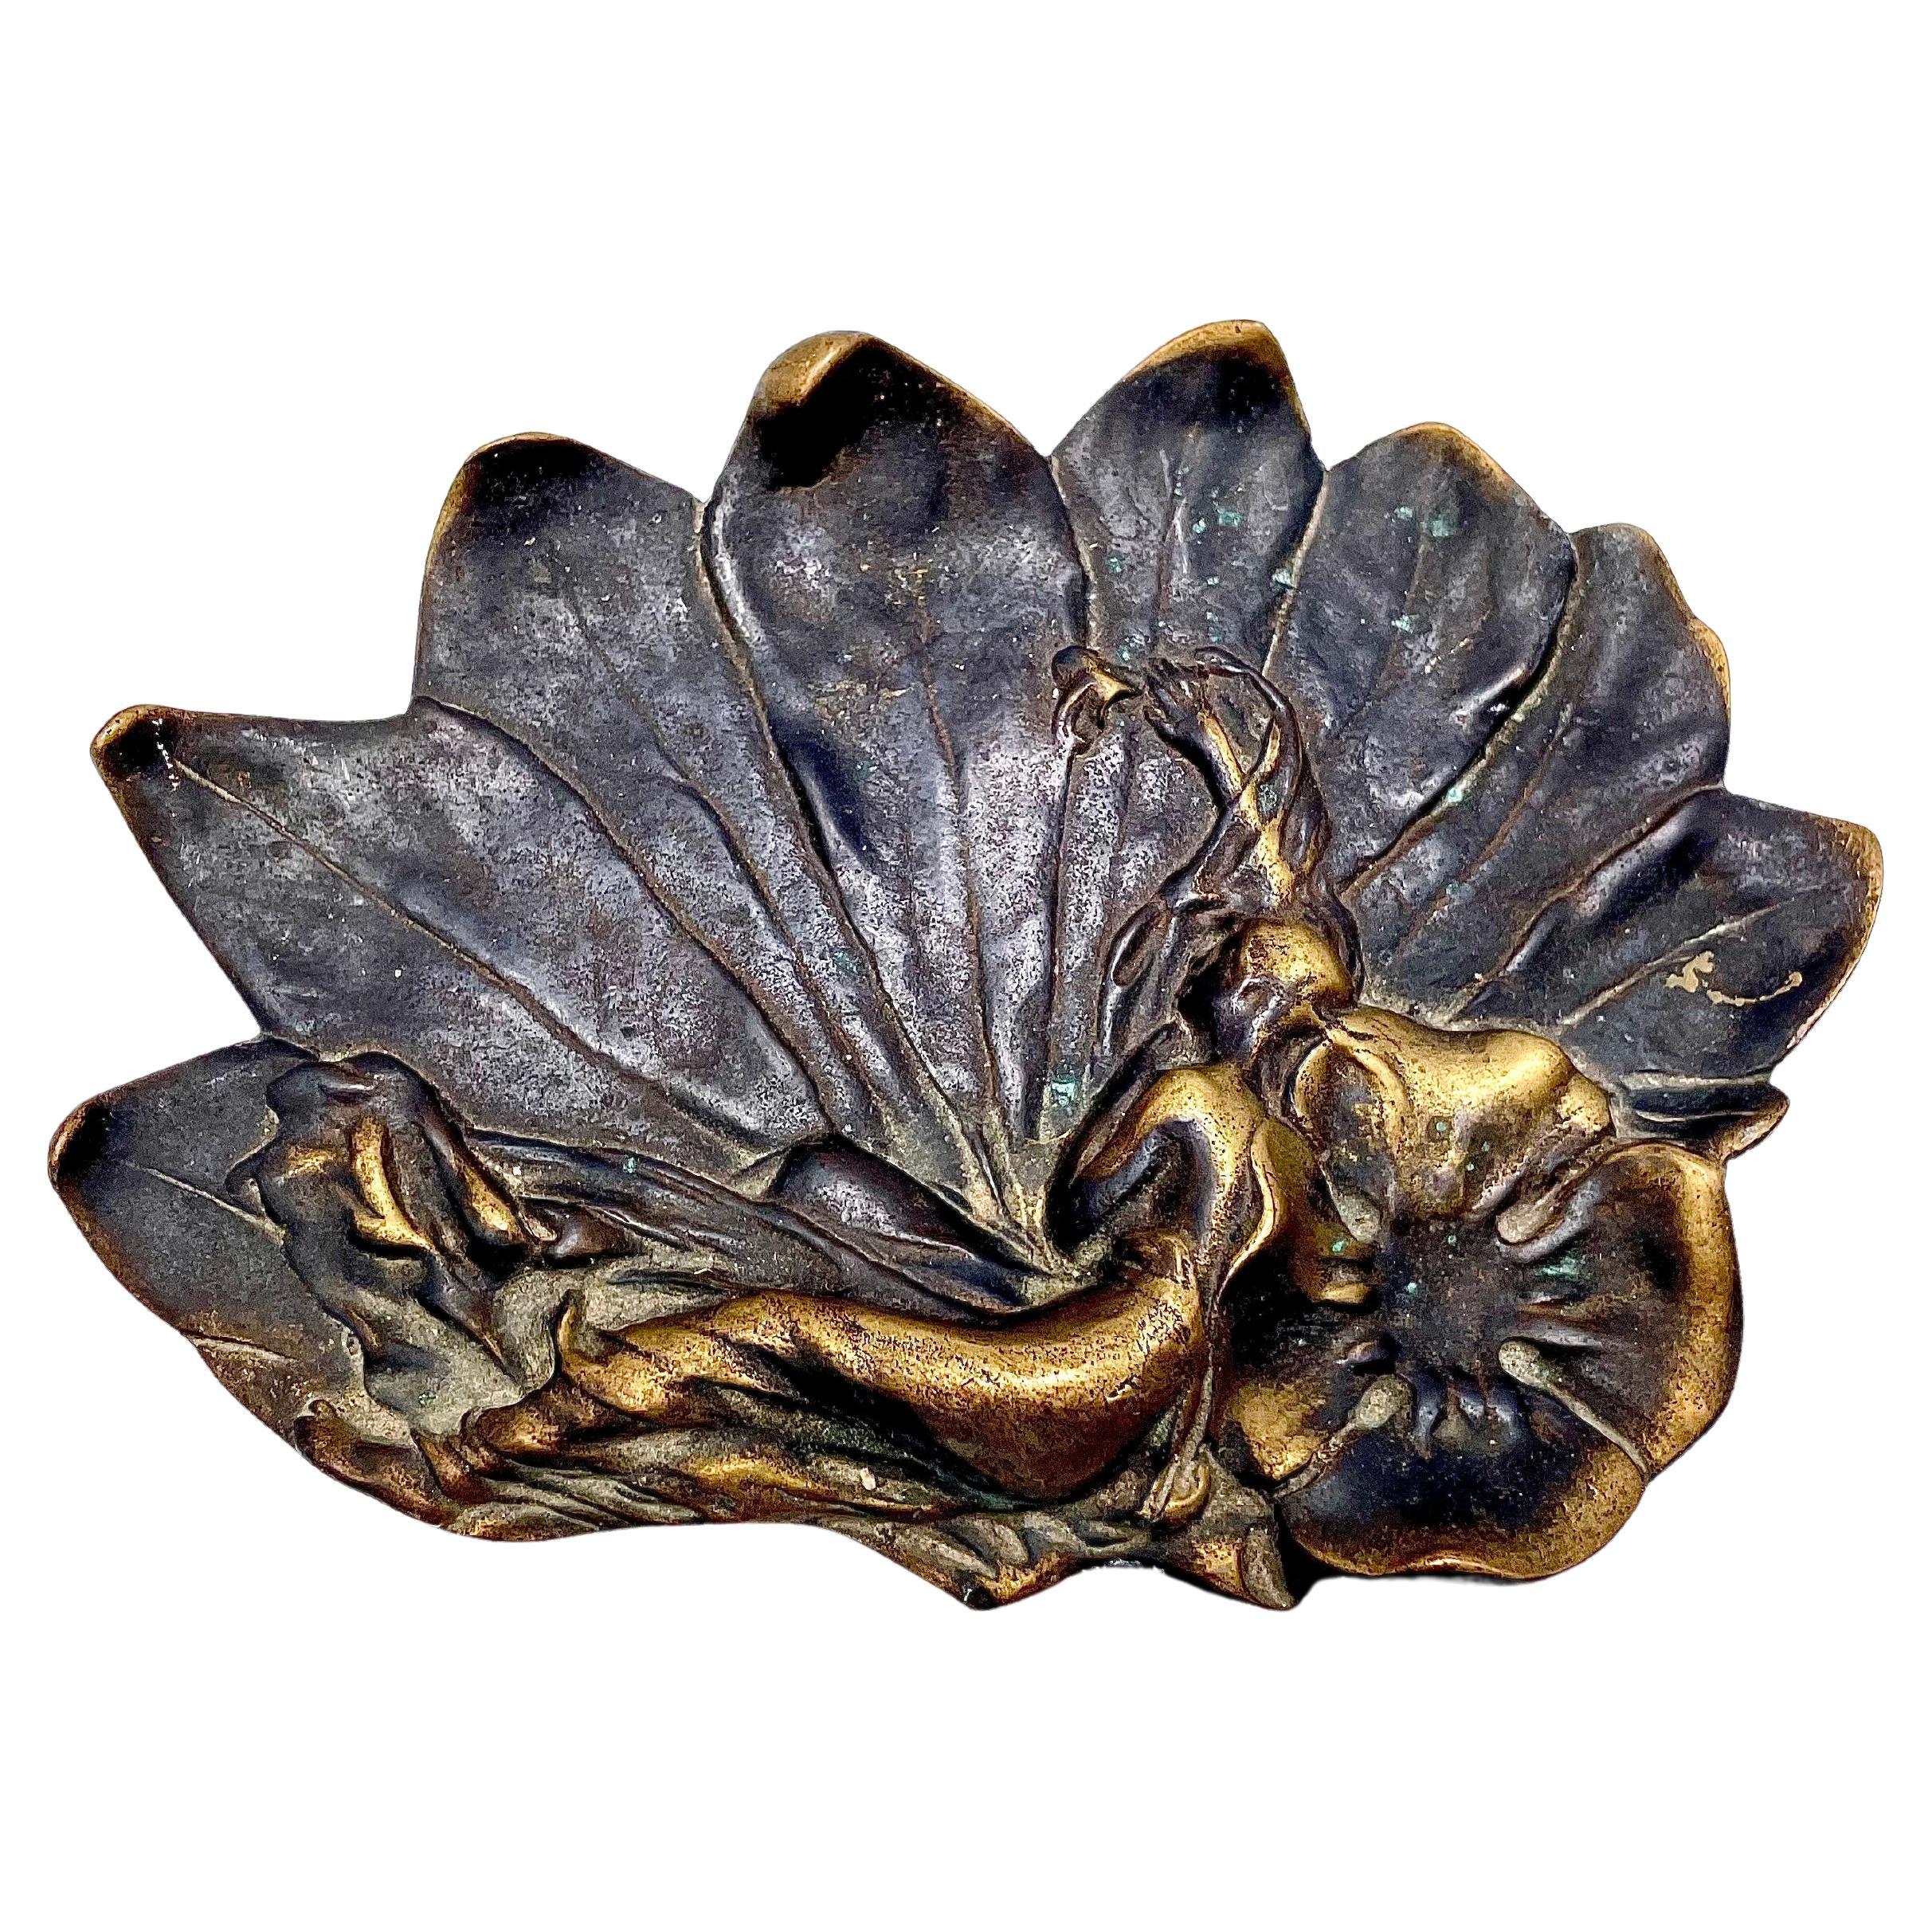 Vide Poche, Art Nouveau Period, in Bronze with Gold and Black Patina